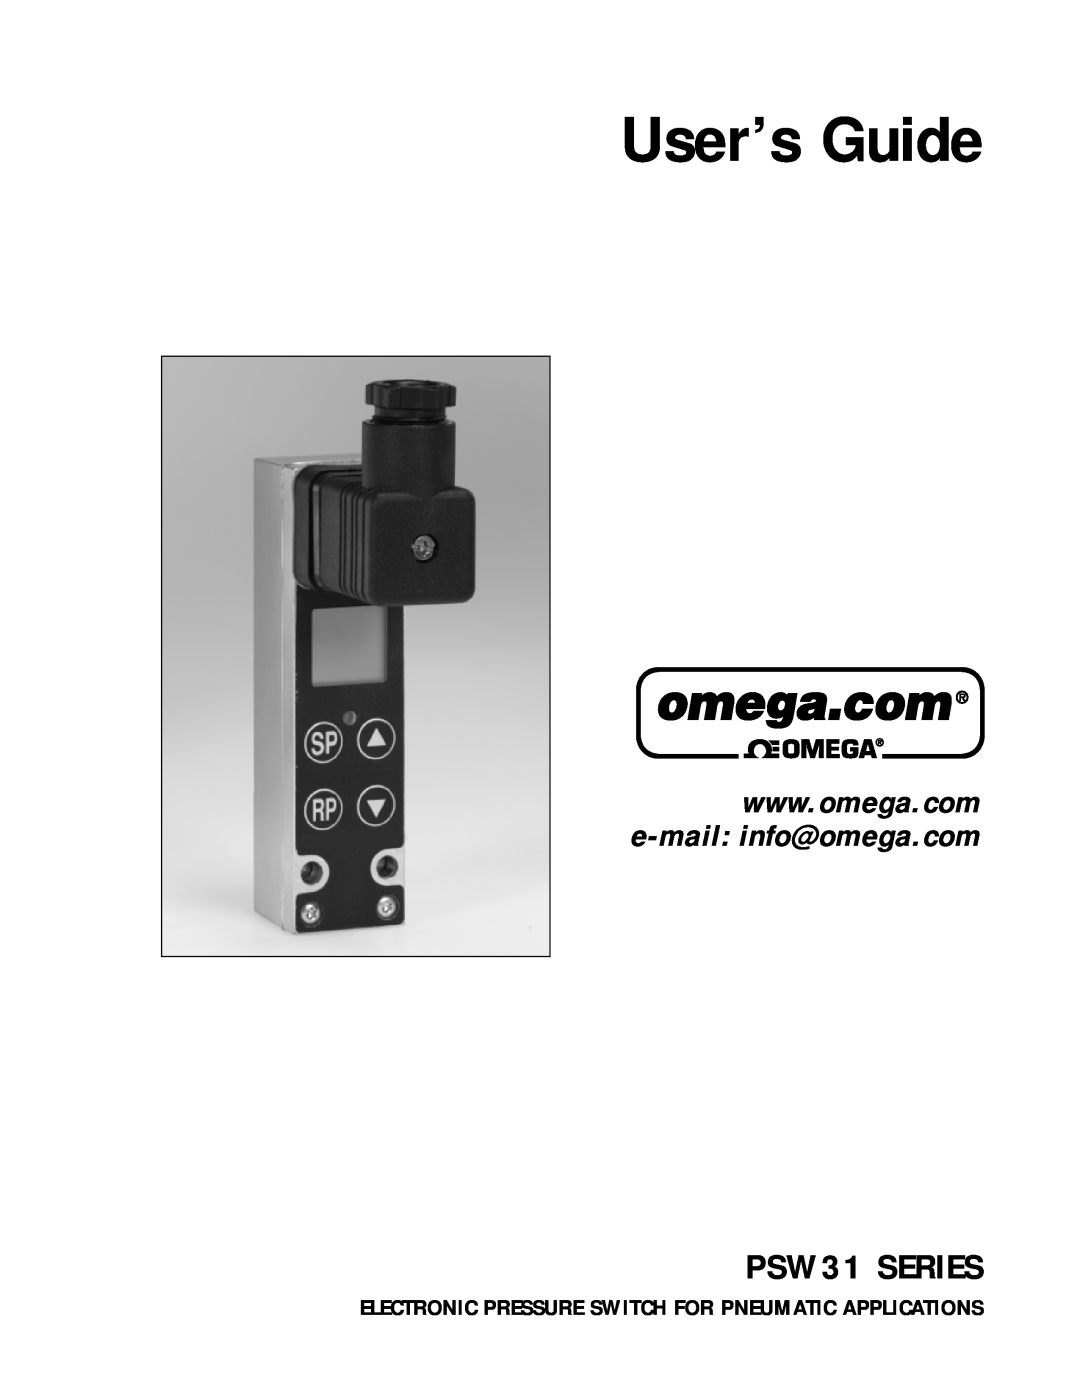 Omega PSW 31 manual PSW31 SERIES, User’s Guide 